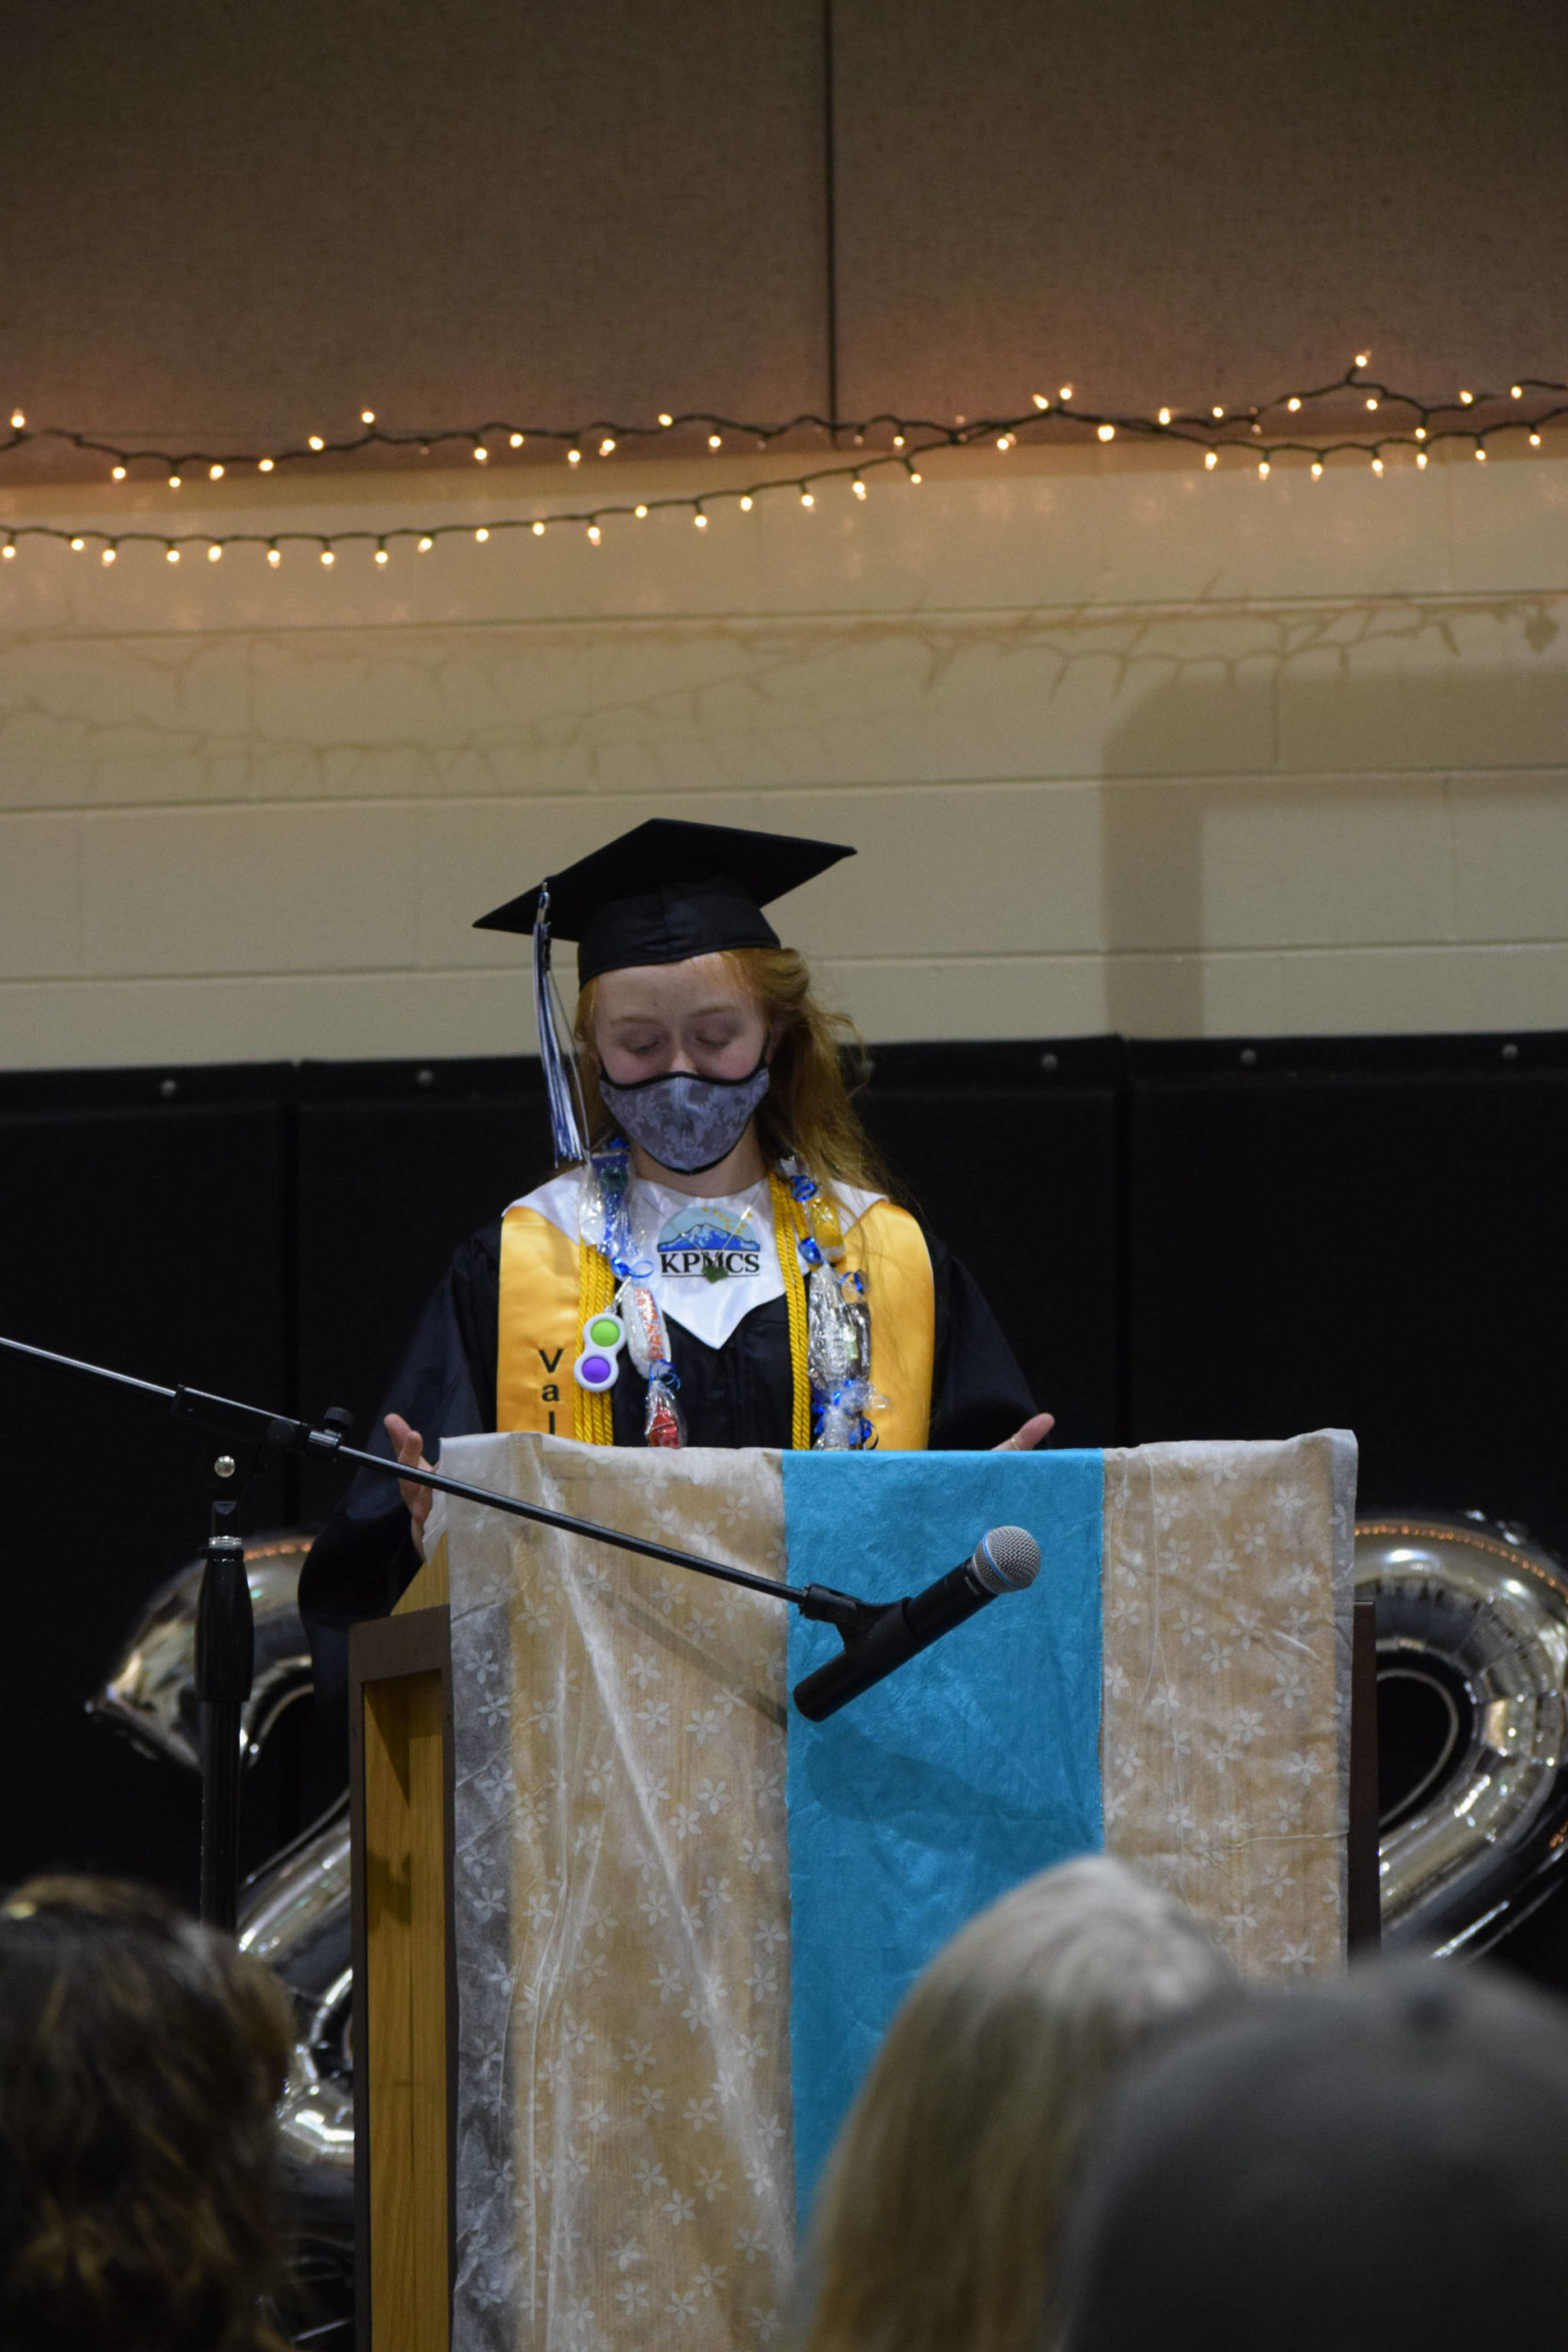 Tovia Owens speaks at the River City Academy graduation in Soldotna, Alaska on Monday, May 17, 2021. She graduated as the valedictorian of Kenai Peninsula Middle College and was a part of the National Honor Society. (Camille Botello / Peninsula Clarion)